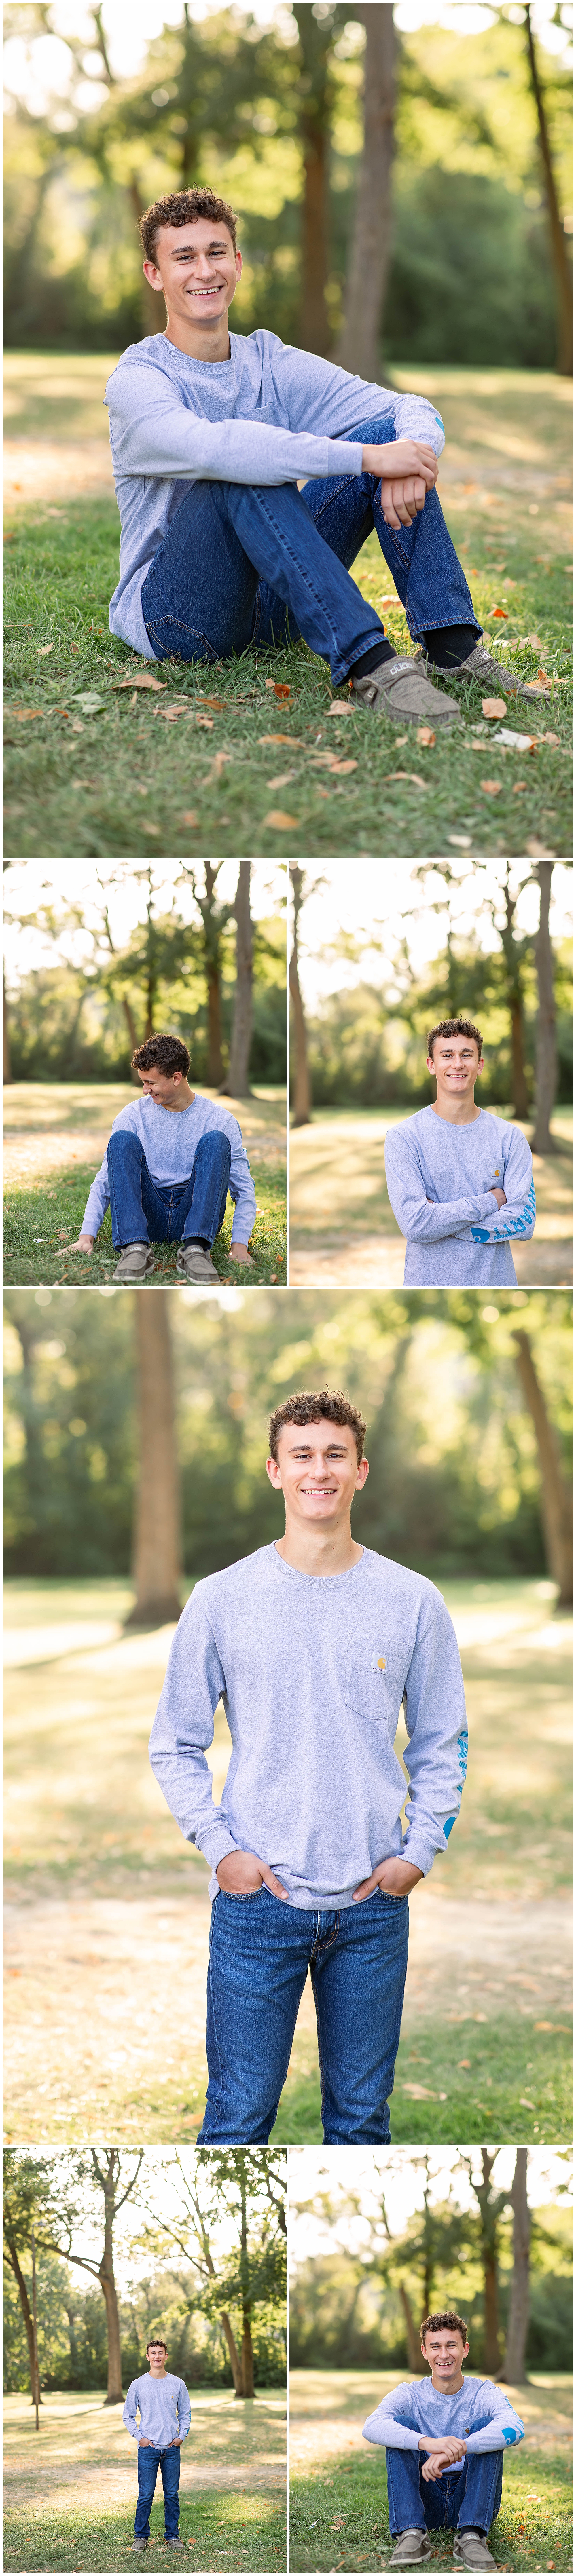 Boys Senior Session, Carhartt shirt and jeans with Hey Dude